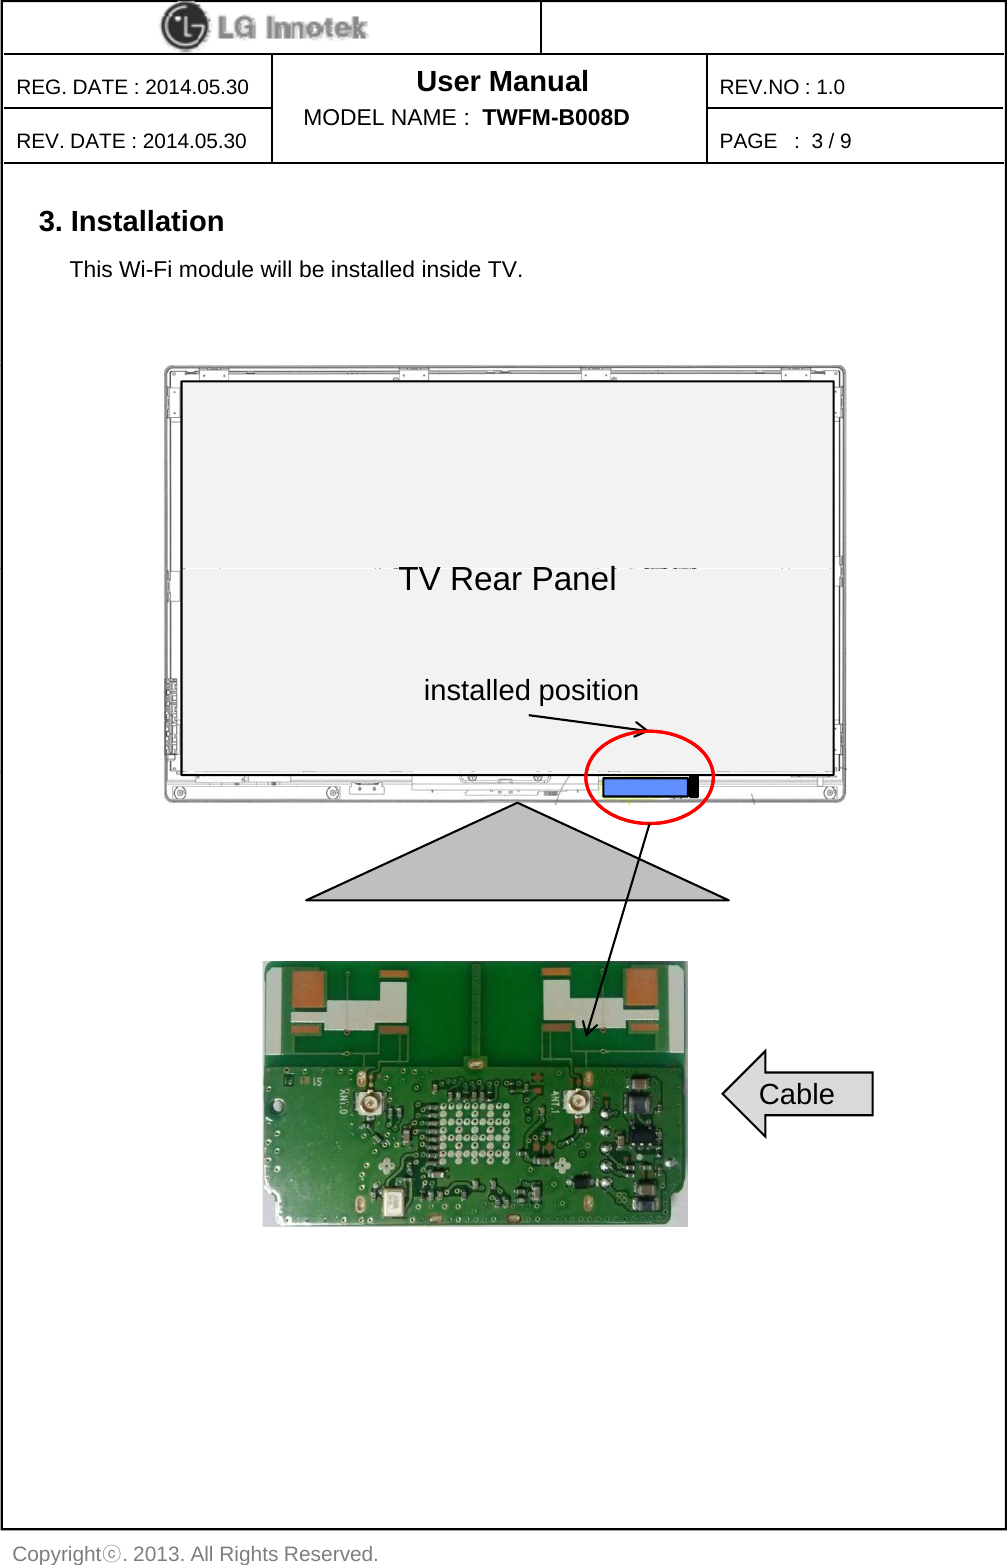 User ManualPAGE   :REG. DATE : 2014.05.30REV. DATE : 2014.05.30REV.NO : 1.0MODEL NAME :  TWFM-B008D 3 / 93. Installation This Wi-Fi module will be installed inside TV.TV R P lTV Rear Panelinstalled positionCableCopyrightⓒ. 2013. All Rights Reserved.